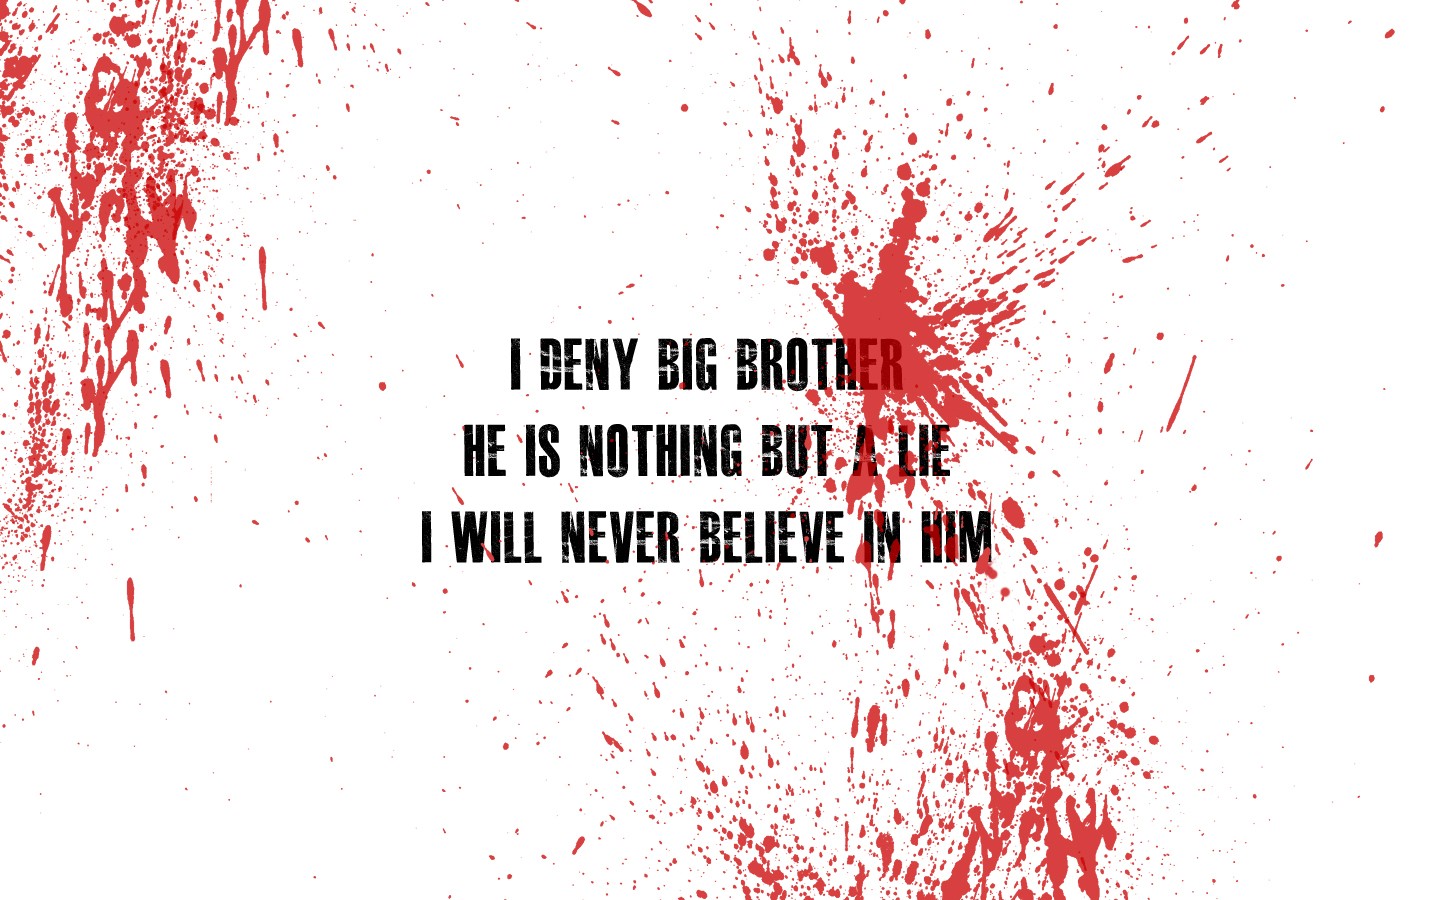 General 1440x900 text quote 1984 blood spatter blood white background minimalism